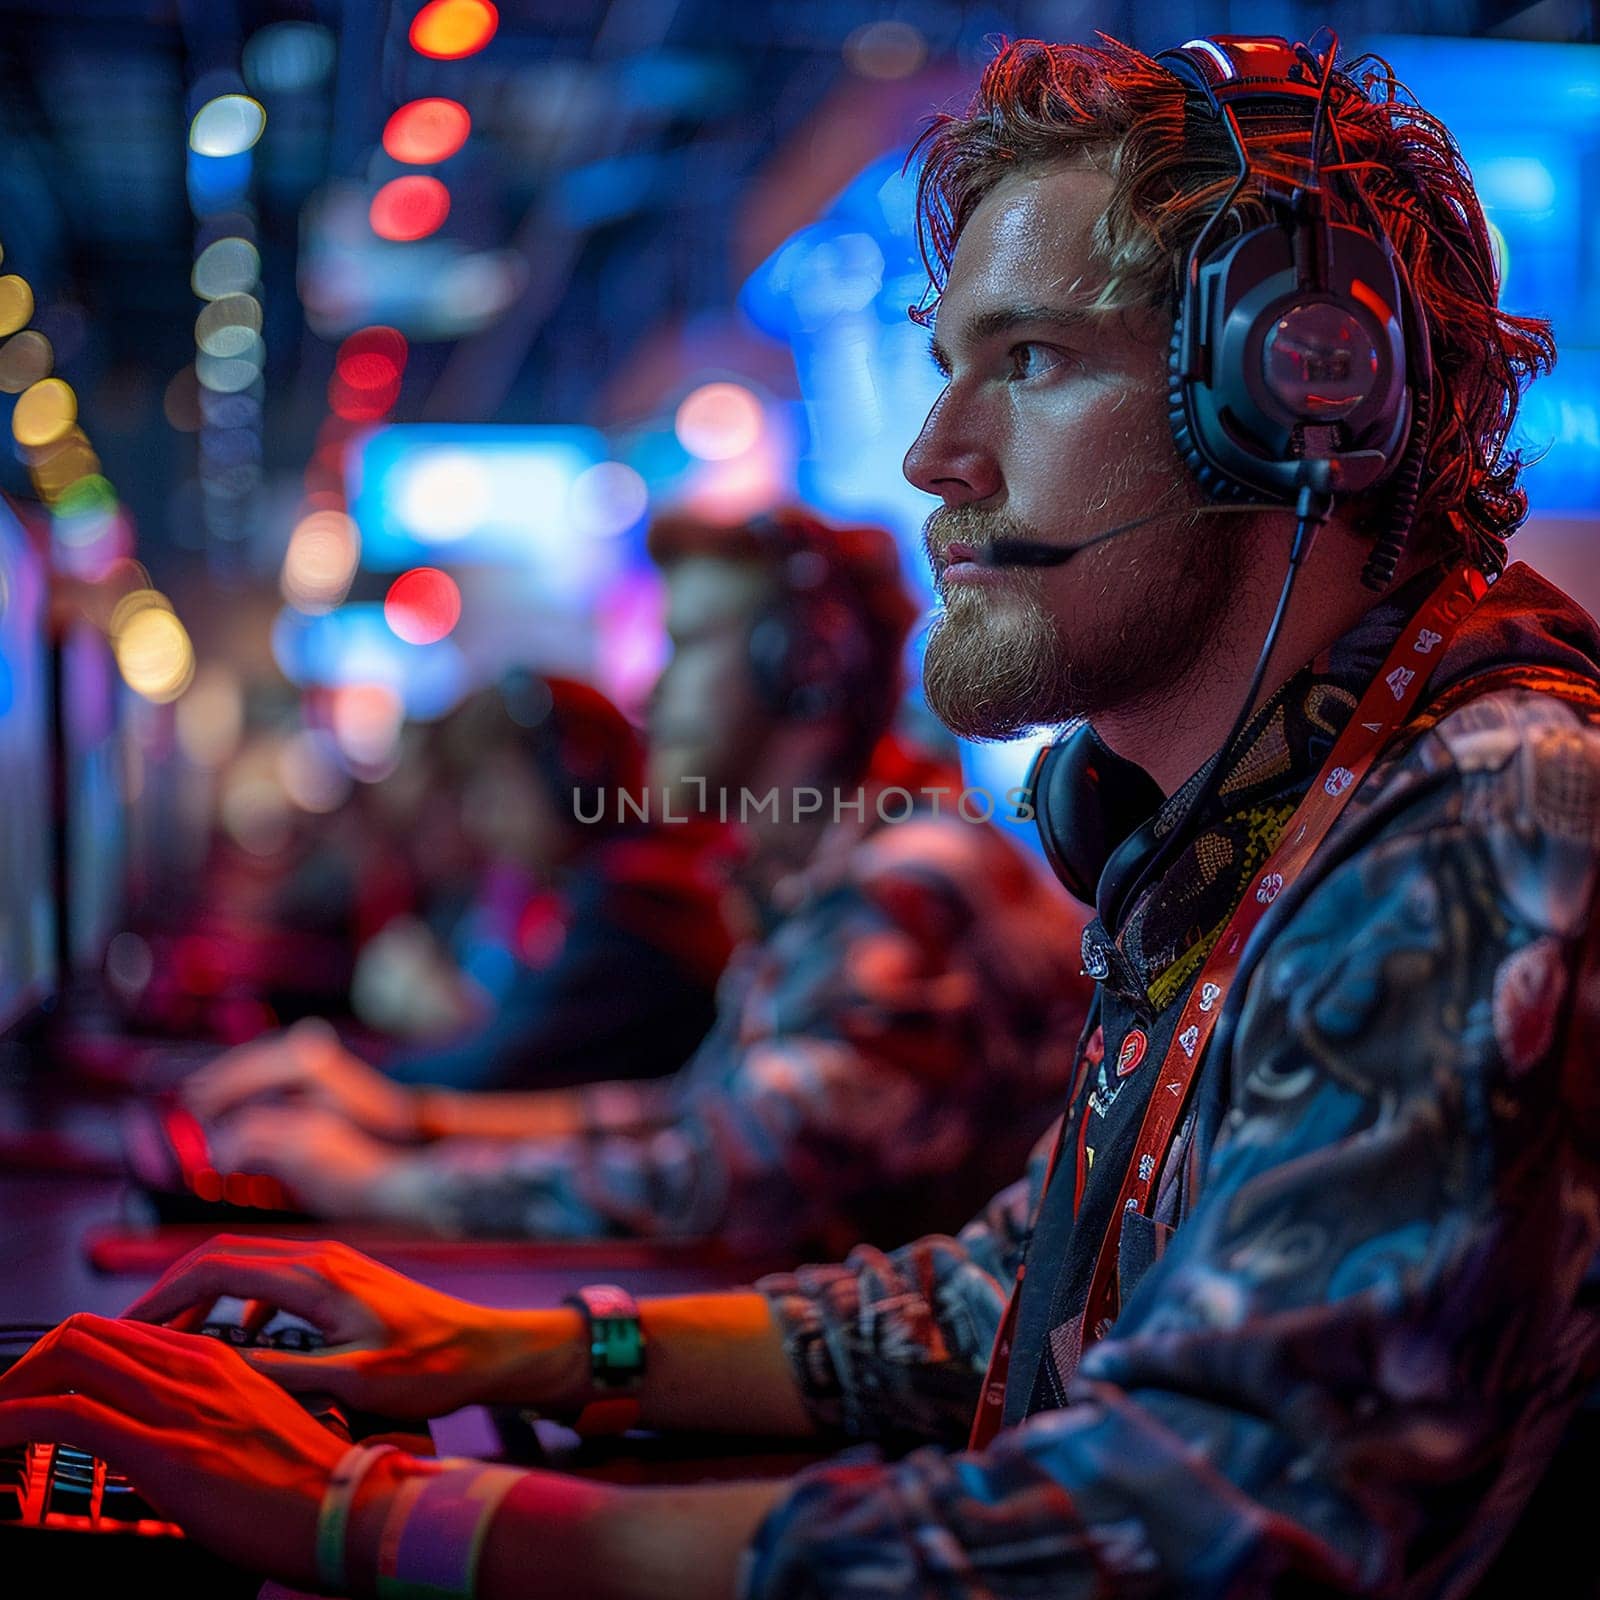 Gaming Tournament Spotlights Competitive Spirit in Business of Esports, Controllers and screens become the arena for the clash of skill and business in gaming.